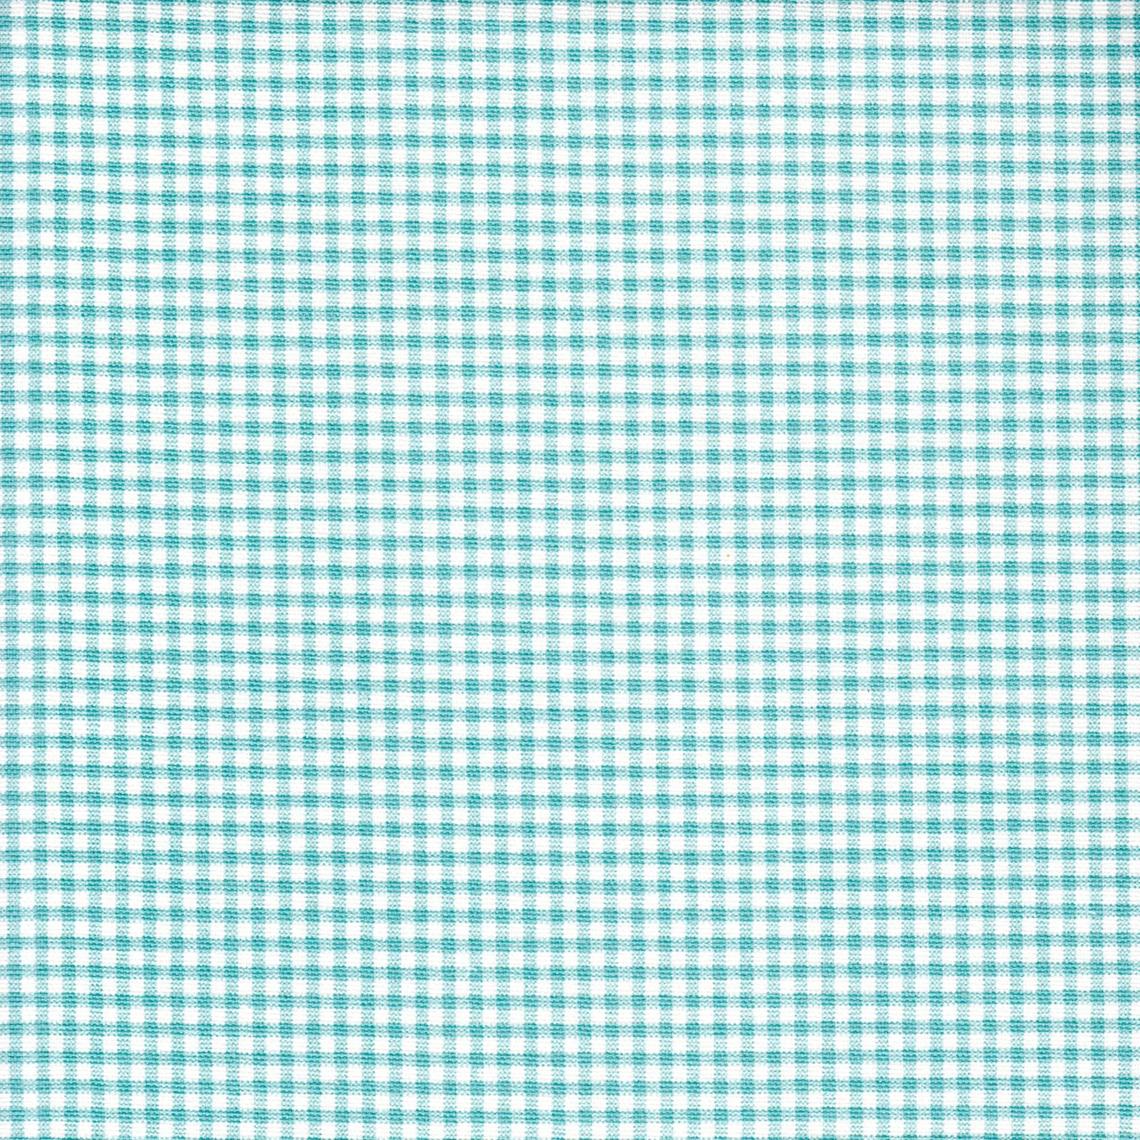 decorative pillows in farmhouse turquoise blue gingham check on cream